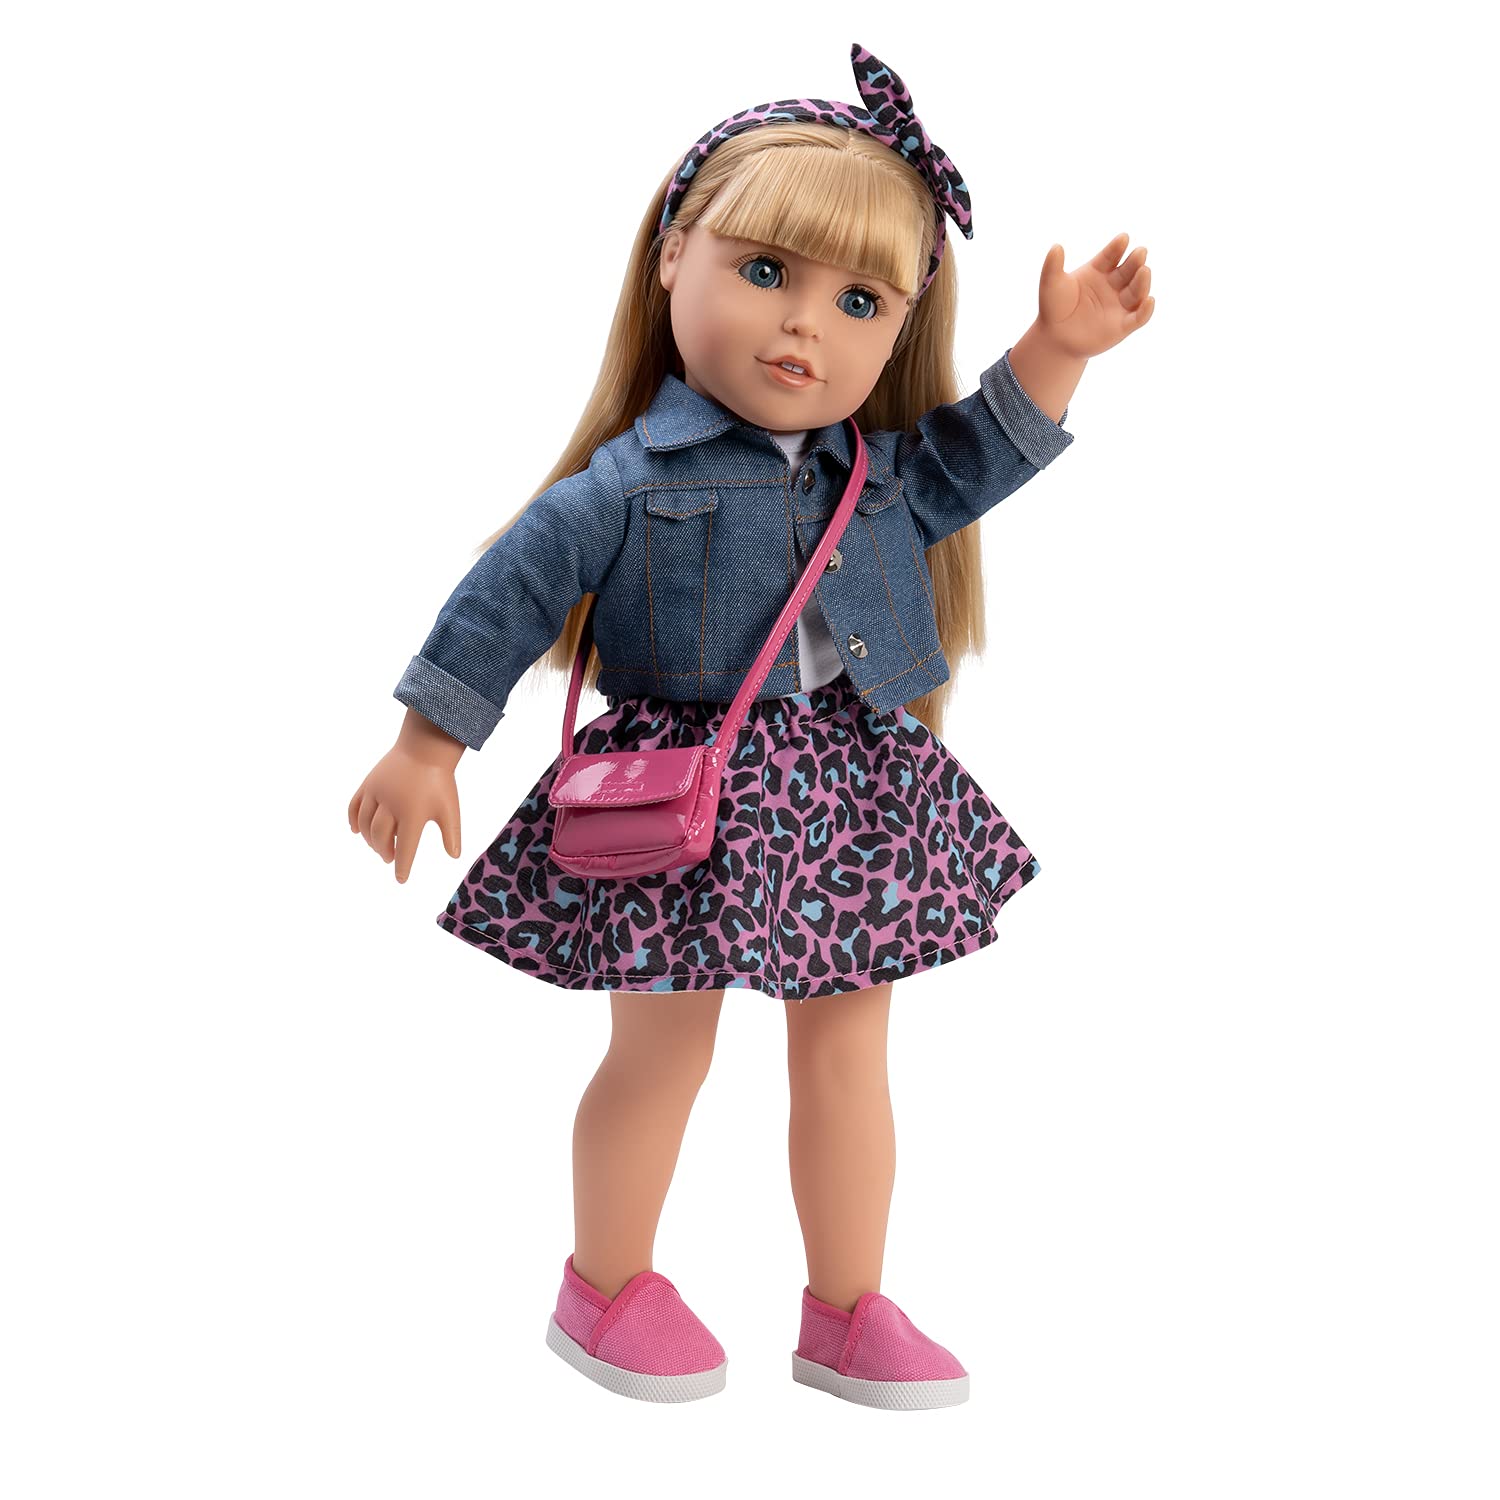 Adora 18-inch Doll Amazing Girls Claire Cheetah Chic (Amazon Exclusive)